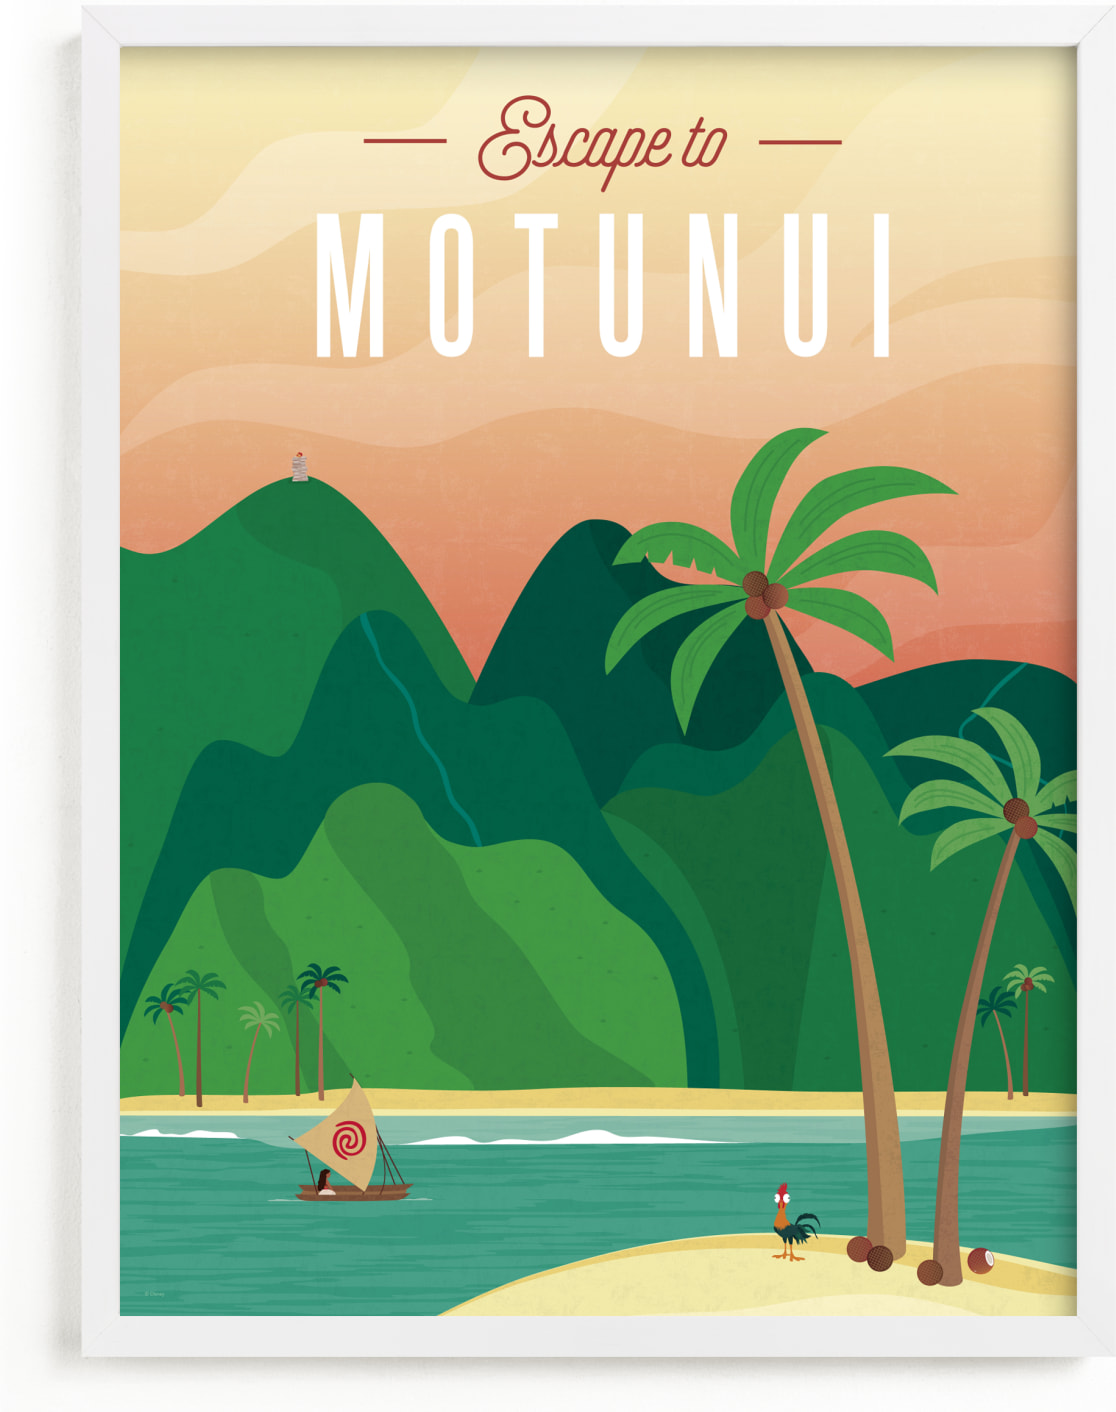 This is a colorful disney art by Erica Krystek called Escape to Motunui from Disney's Moana.